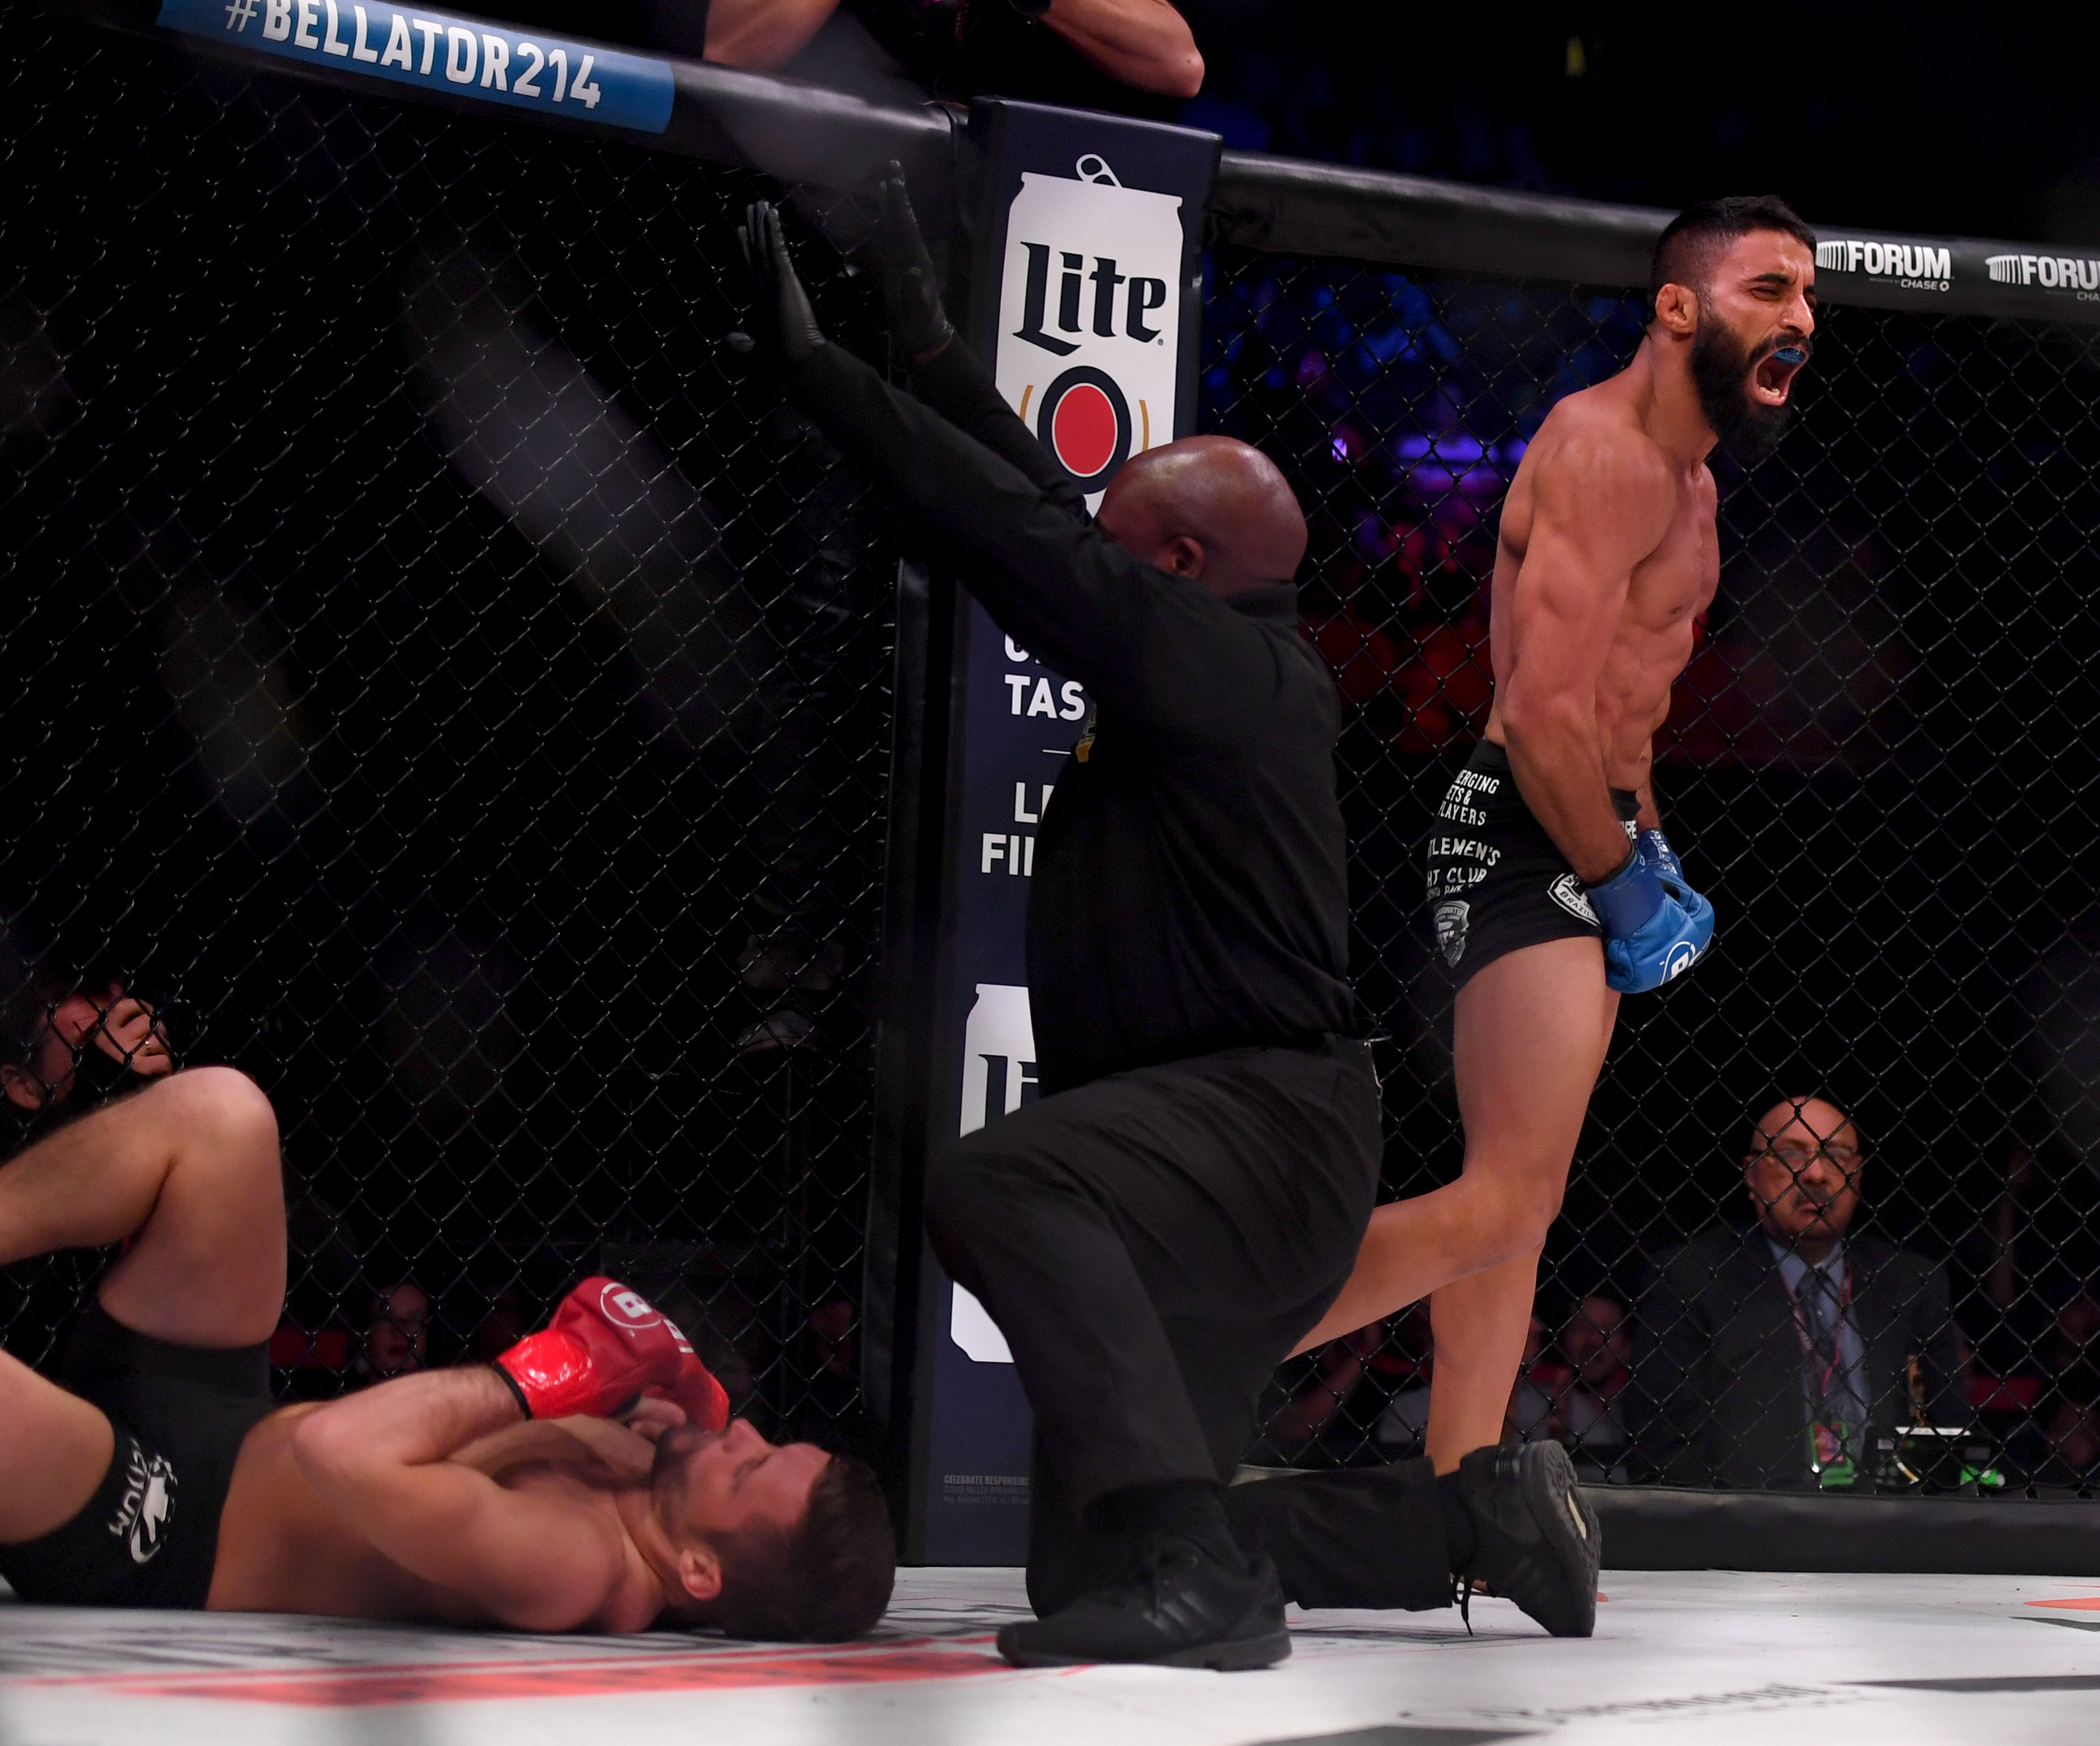 Adel Altamimi (blue) defeats Brandon McMahan (red) during Bellator 214 at the Forum in Inglewood, California, Saturday, January 26, 2019. | Source: Getty Images